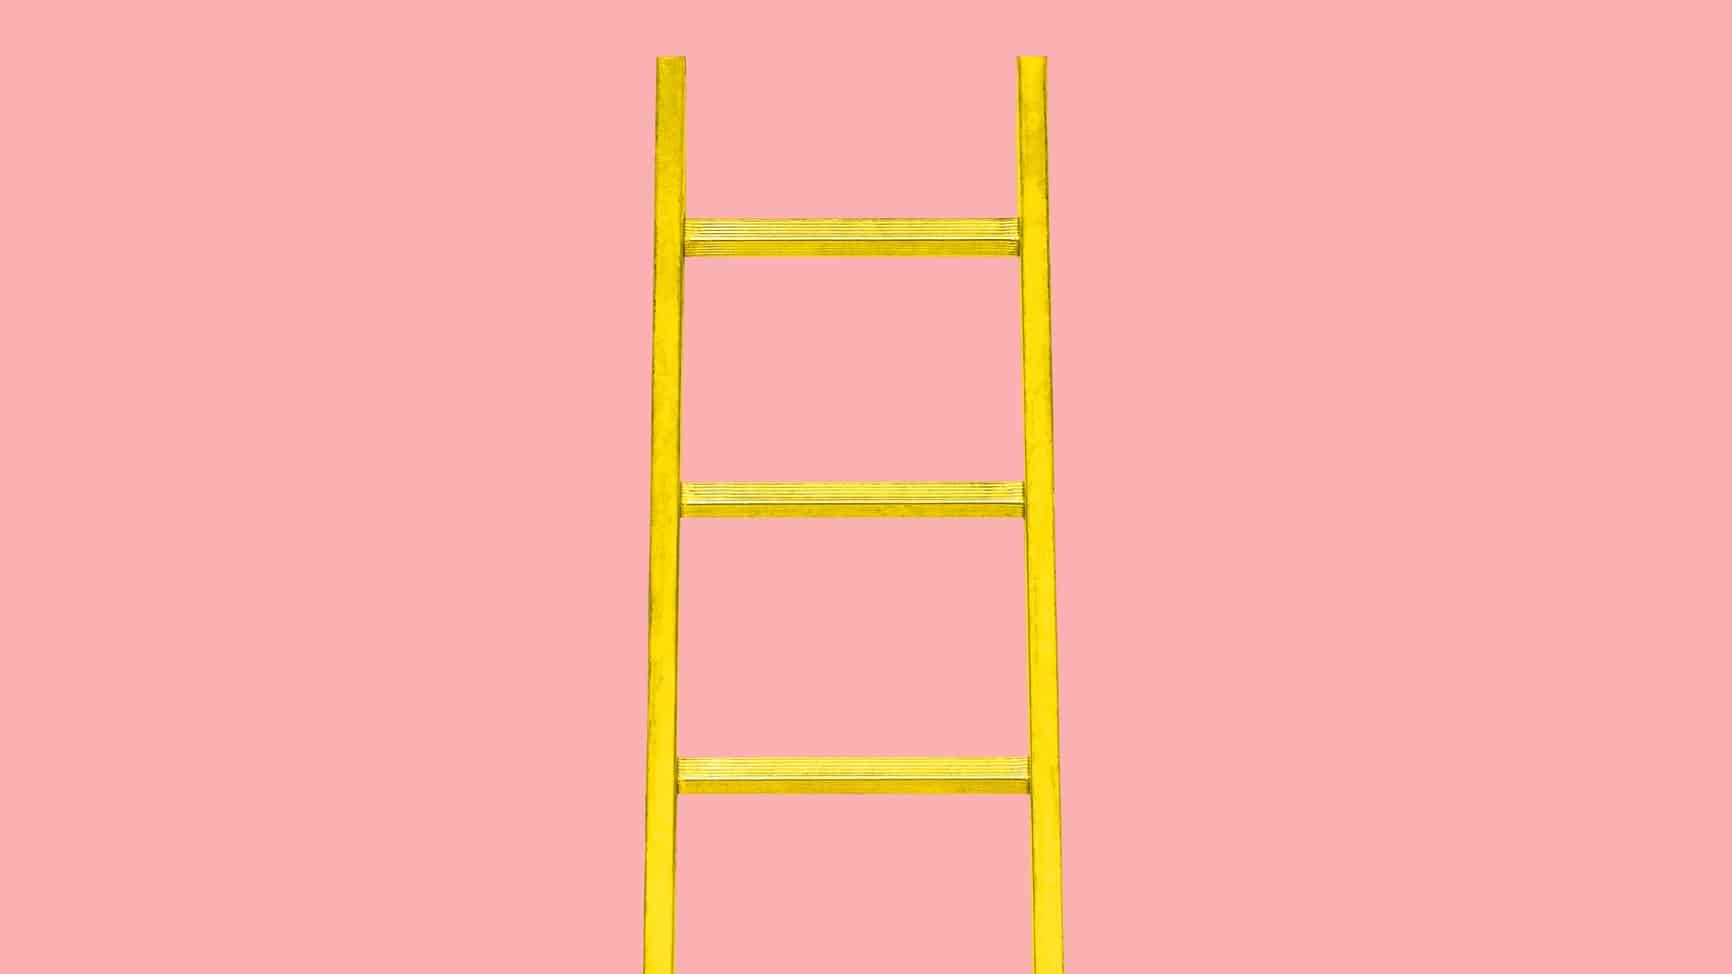 growth stocks represented by yellow ladder against pink background